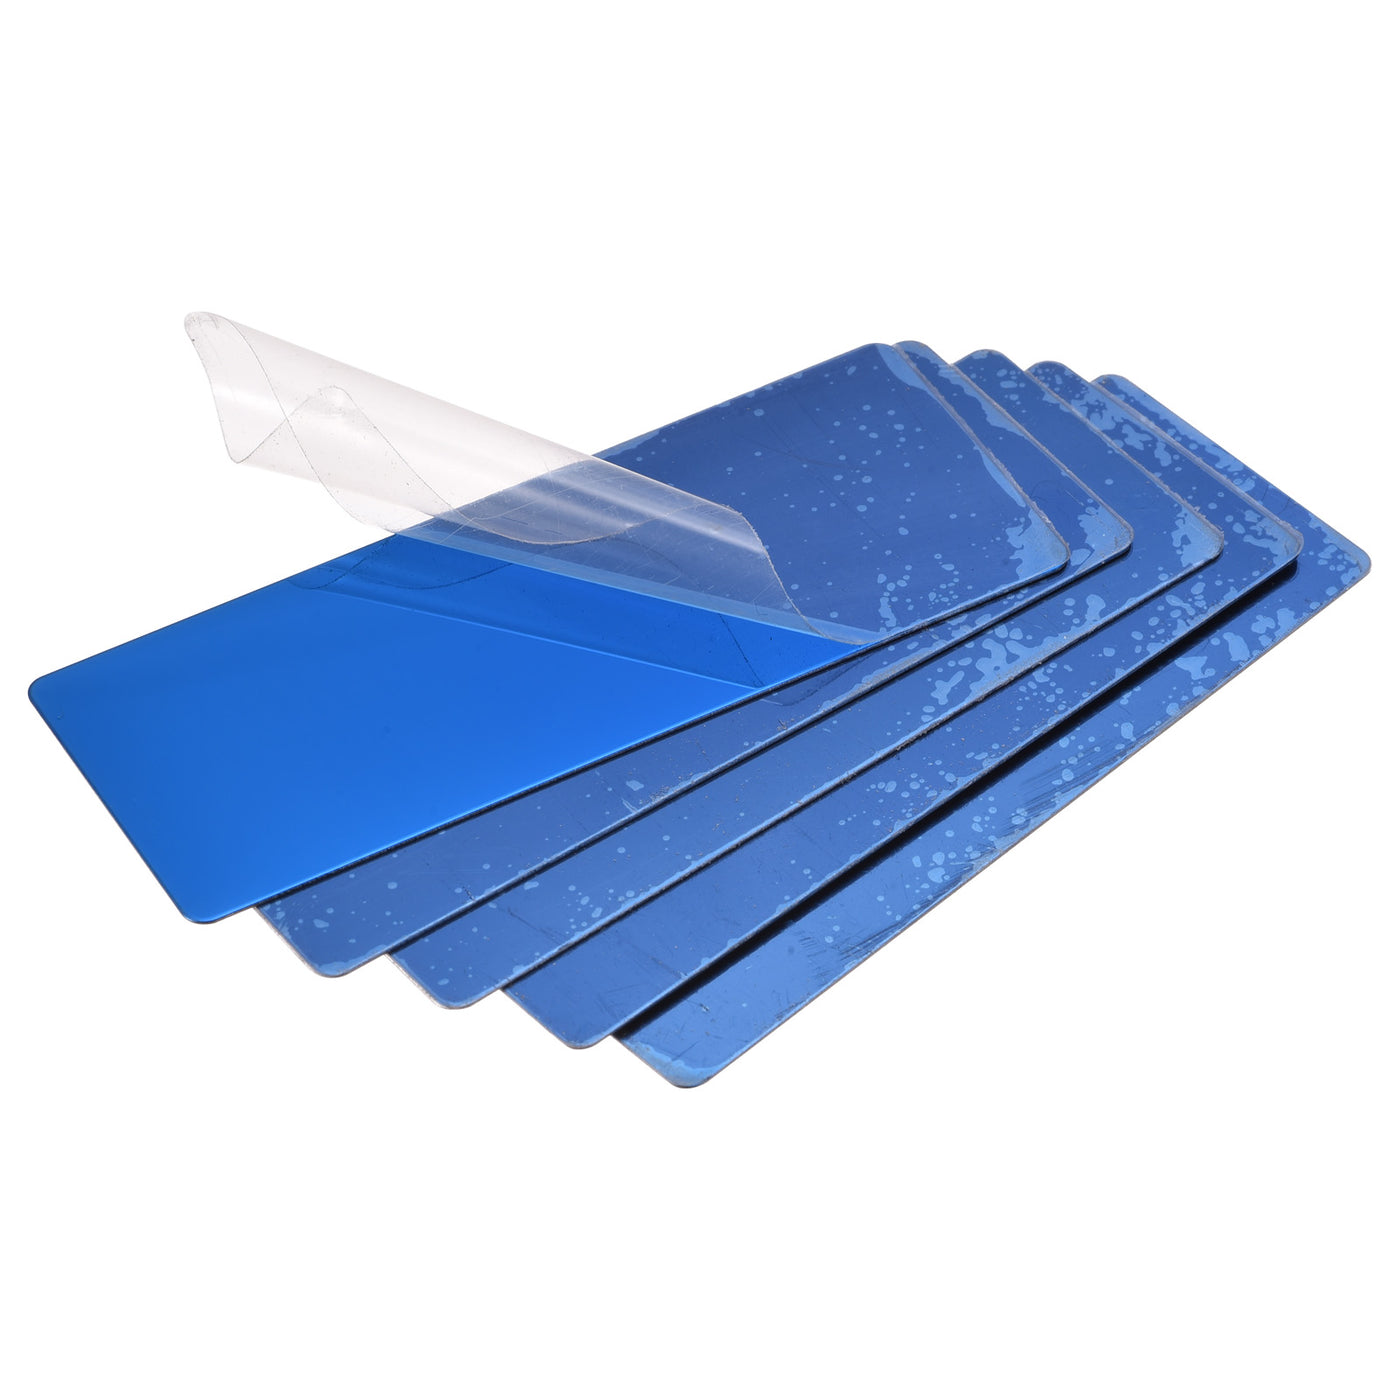 uxcell Uxcell Blank Metal Card 80x30x0.4mm 201 Stainless Steel Plate Polished Navy Blue 10 Pcs